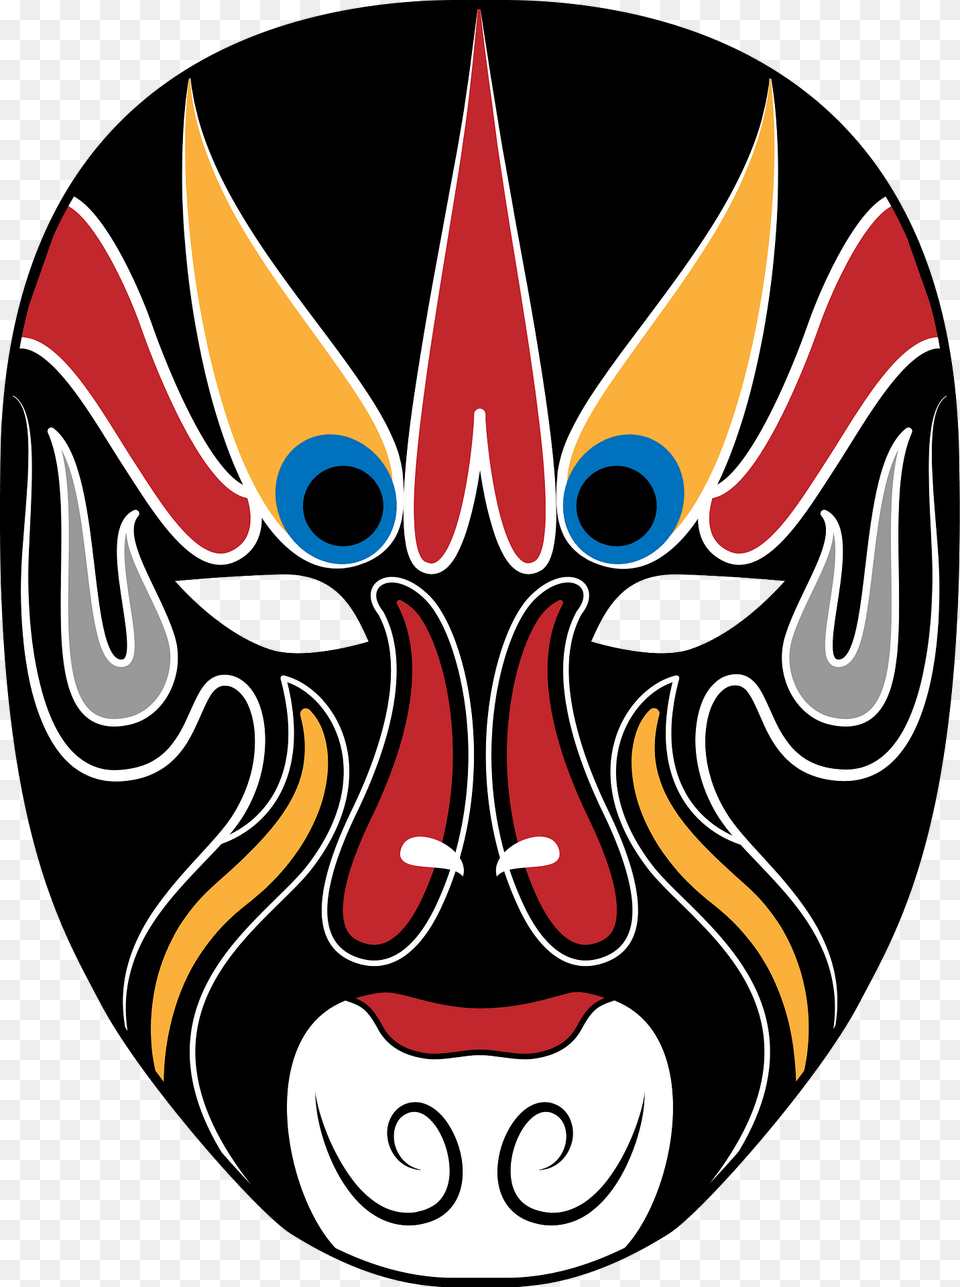 Chenese Opera Mask Clipart Png Image